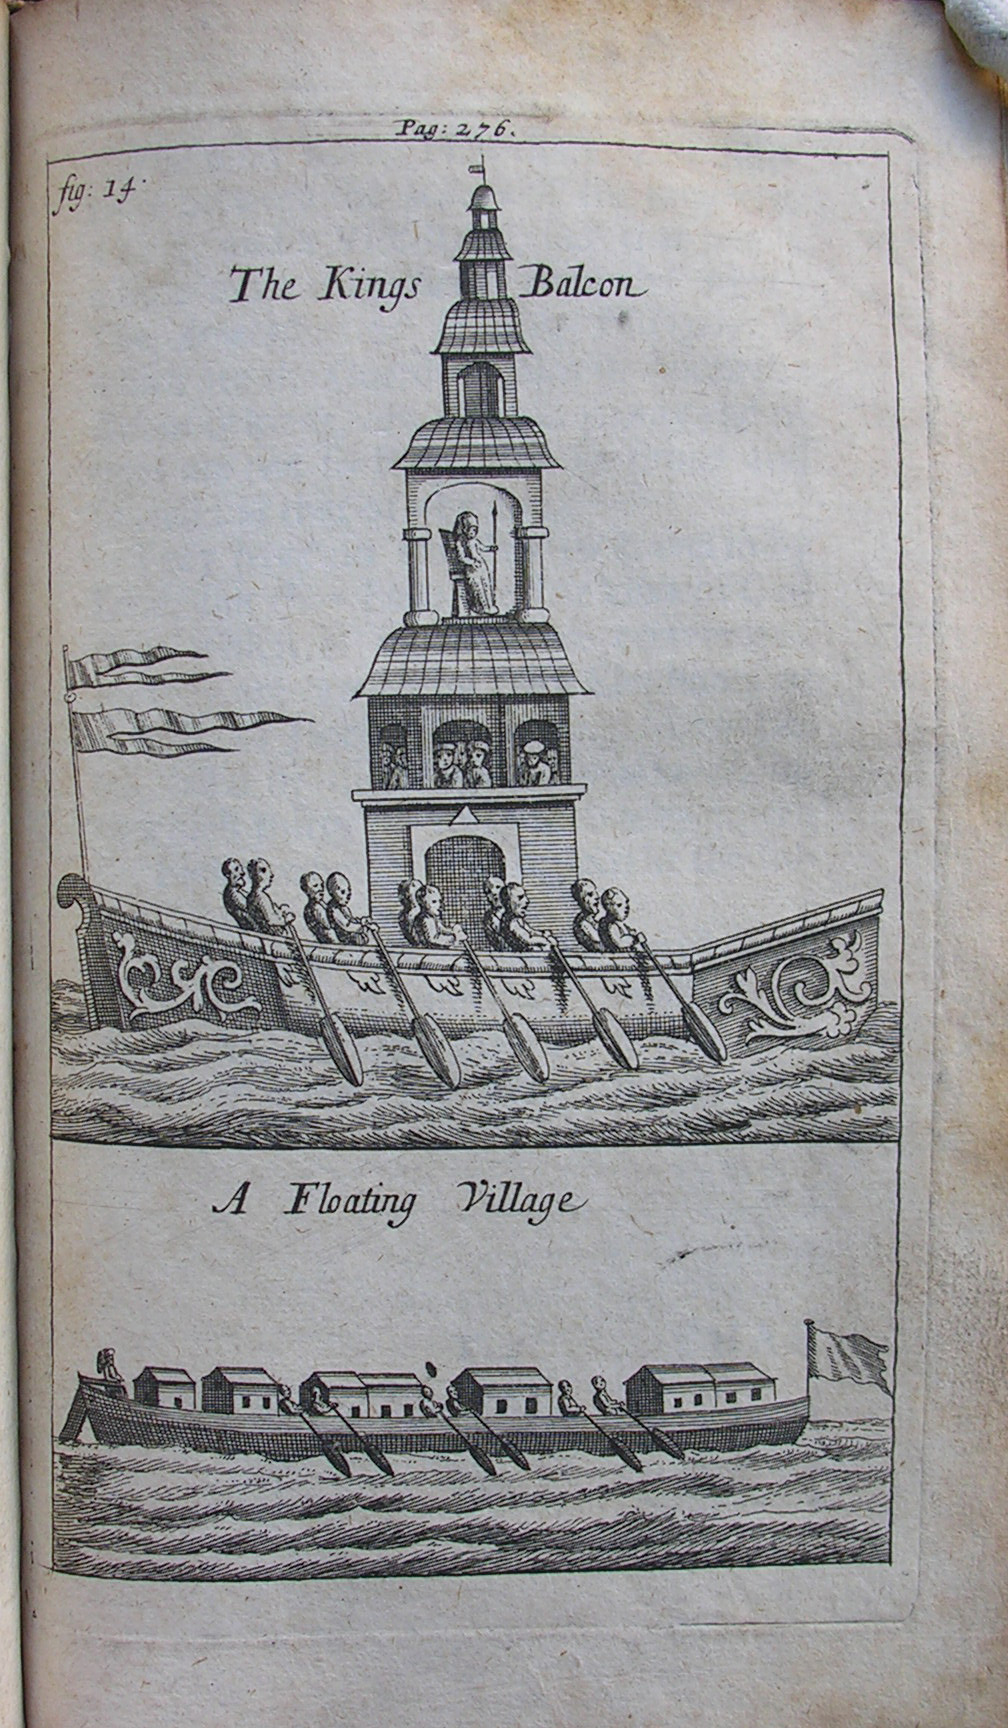 An image depicting two fictional Formosan watercraft. The upper image, titled 'The King[']s Balcon', shows a king and his court in a tower built into a rowboat in motion on the waves. The lower image, titled 'A Floating Village', depicts seven houses incorporated into a long rowboat, similarly in motion.